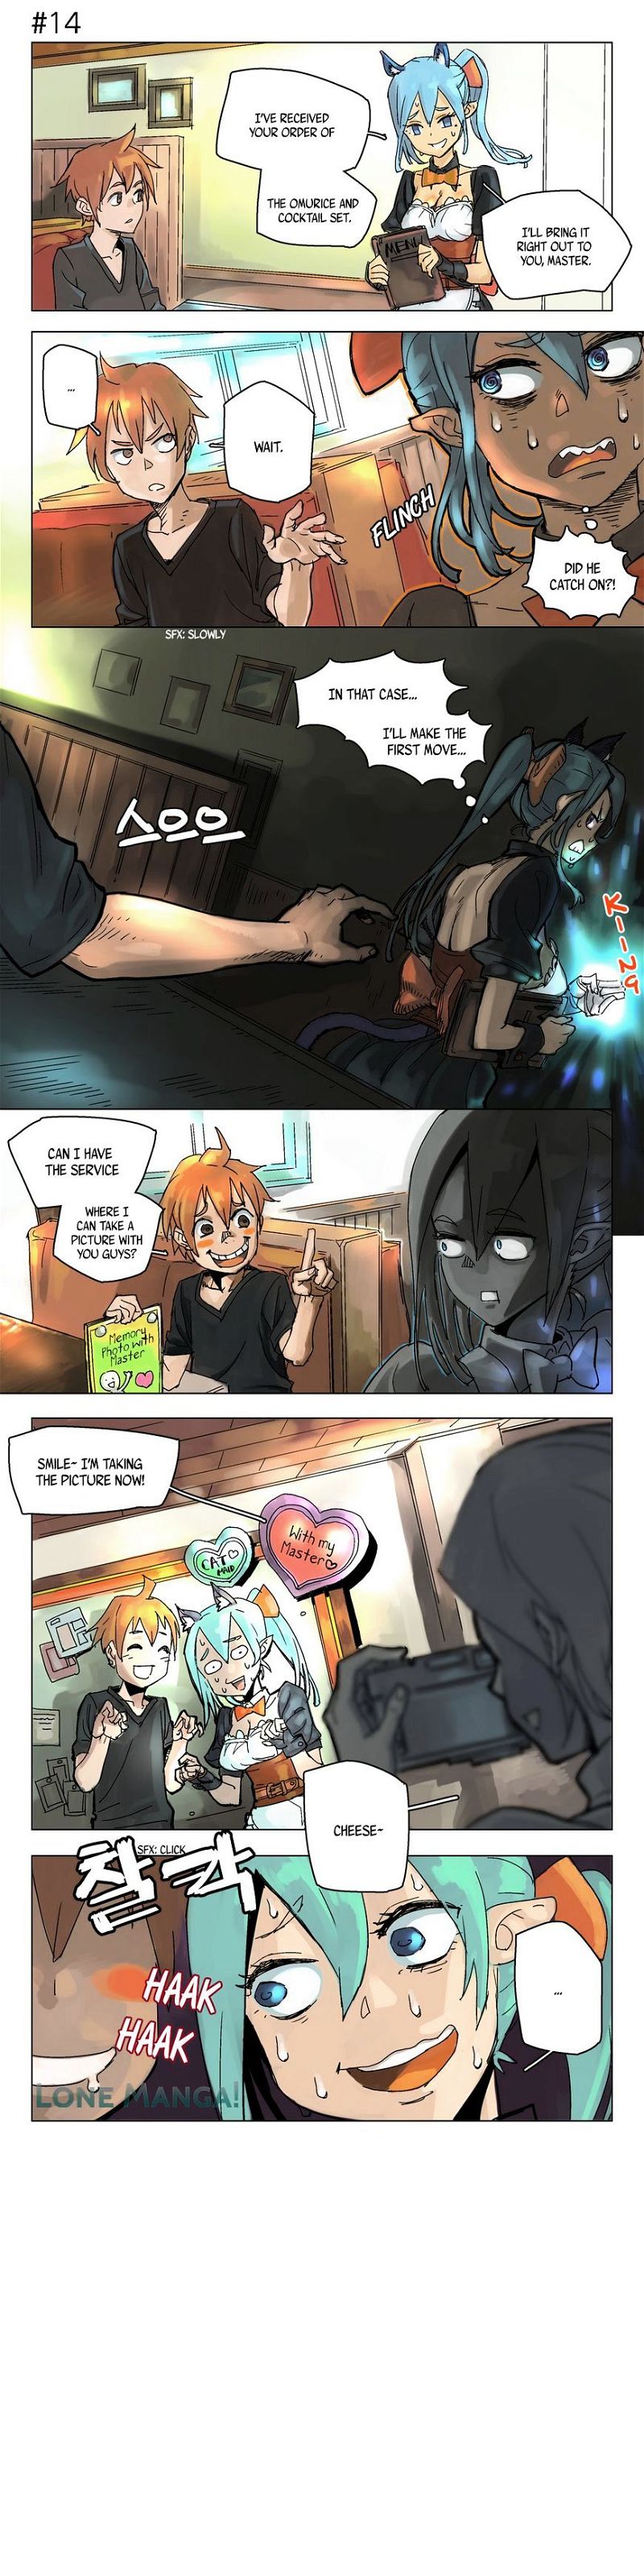 4 Cut Hero Chapter 2 page 3